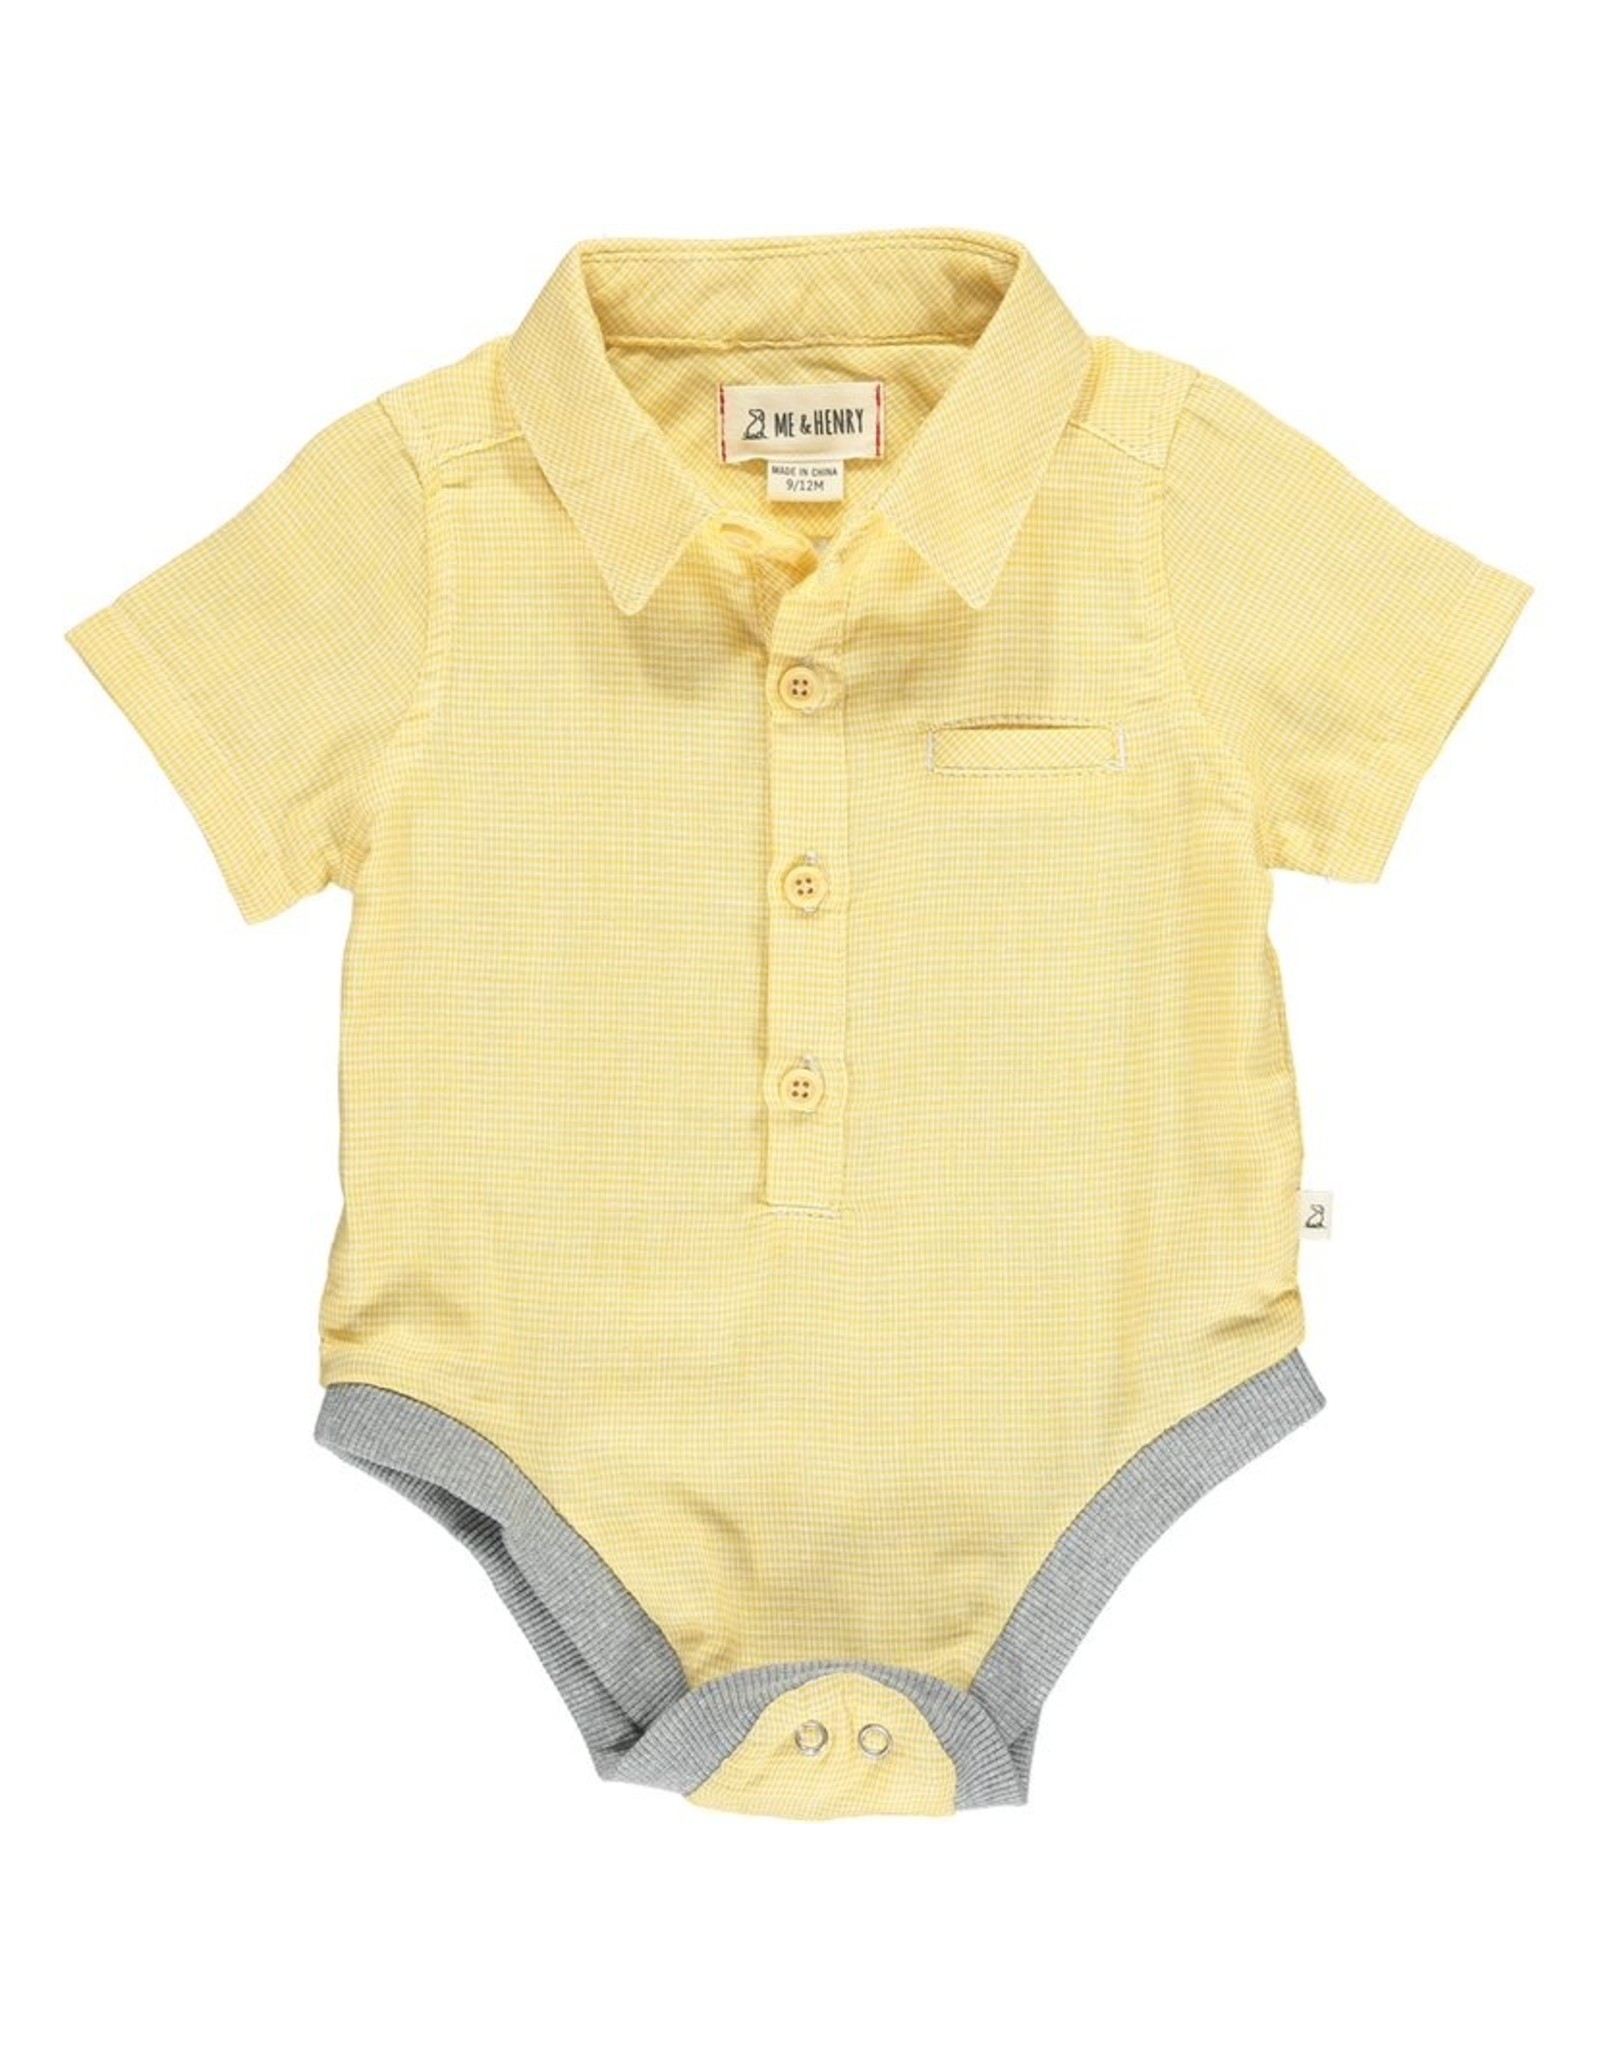 Me & Henry Helford Woven Onesie~Gold Micro Check